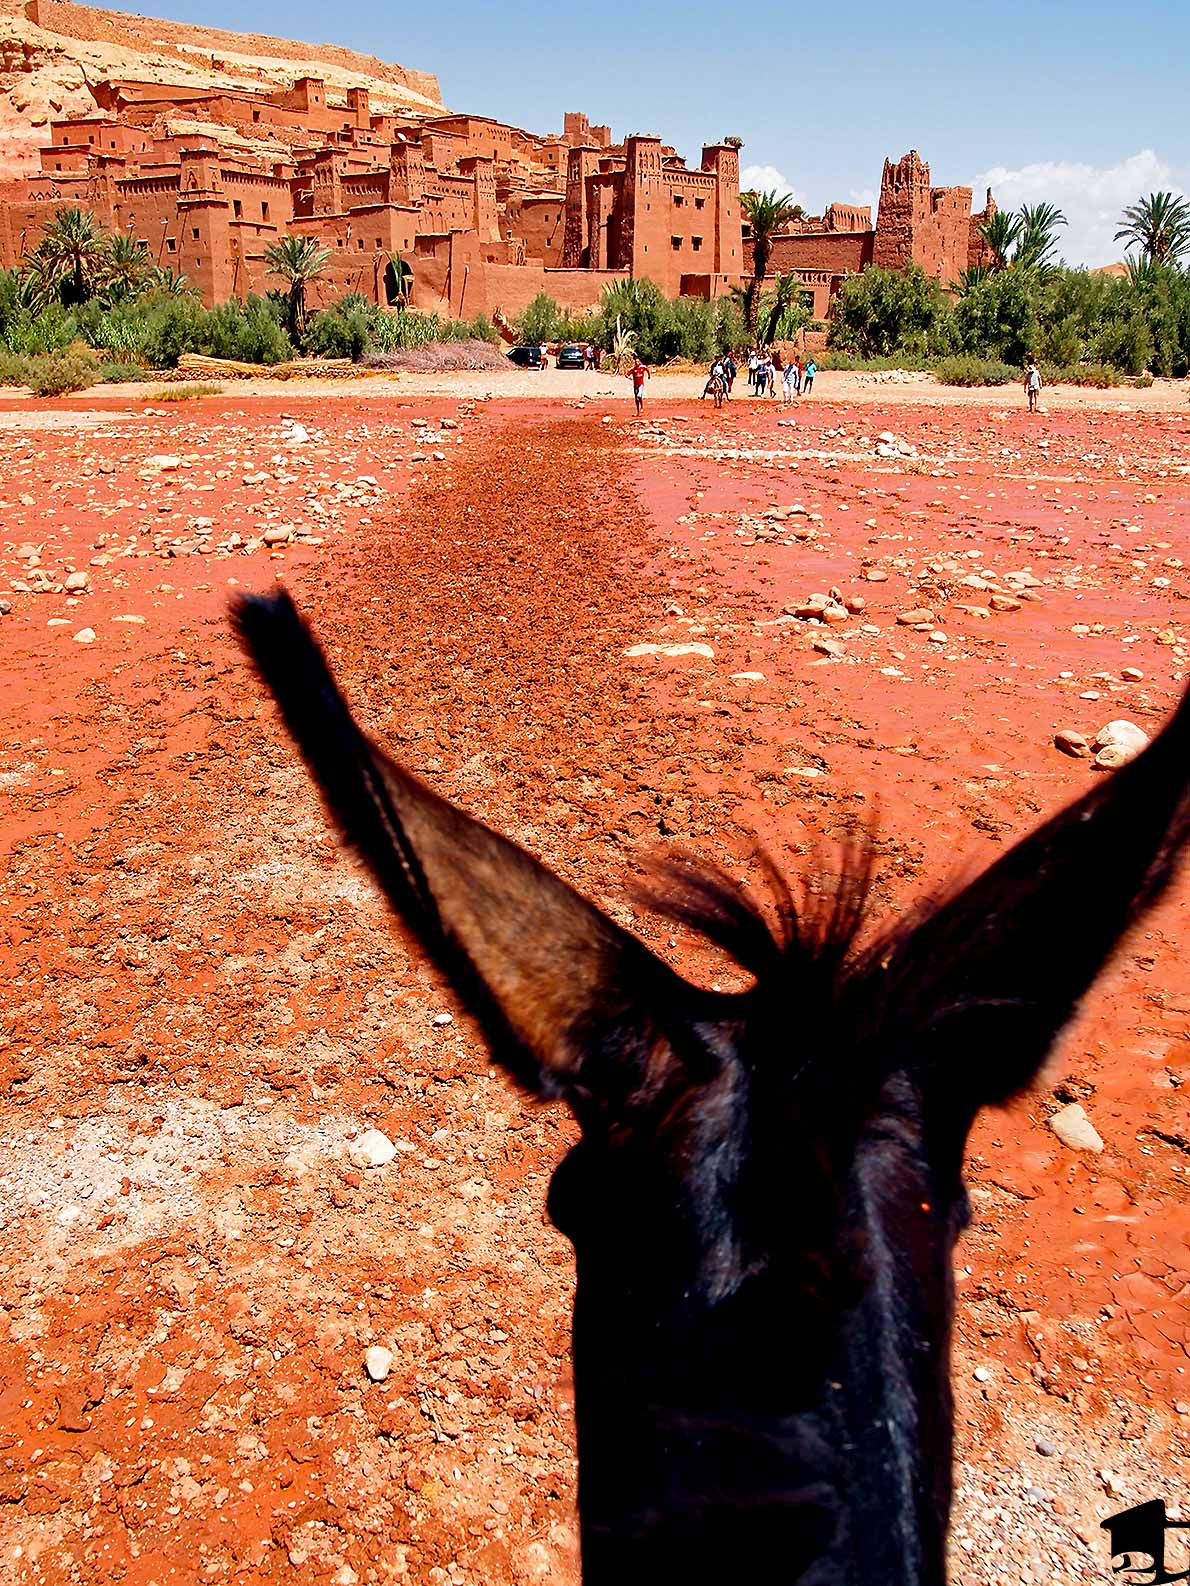 Riding a donkey in Morocco